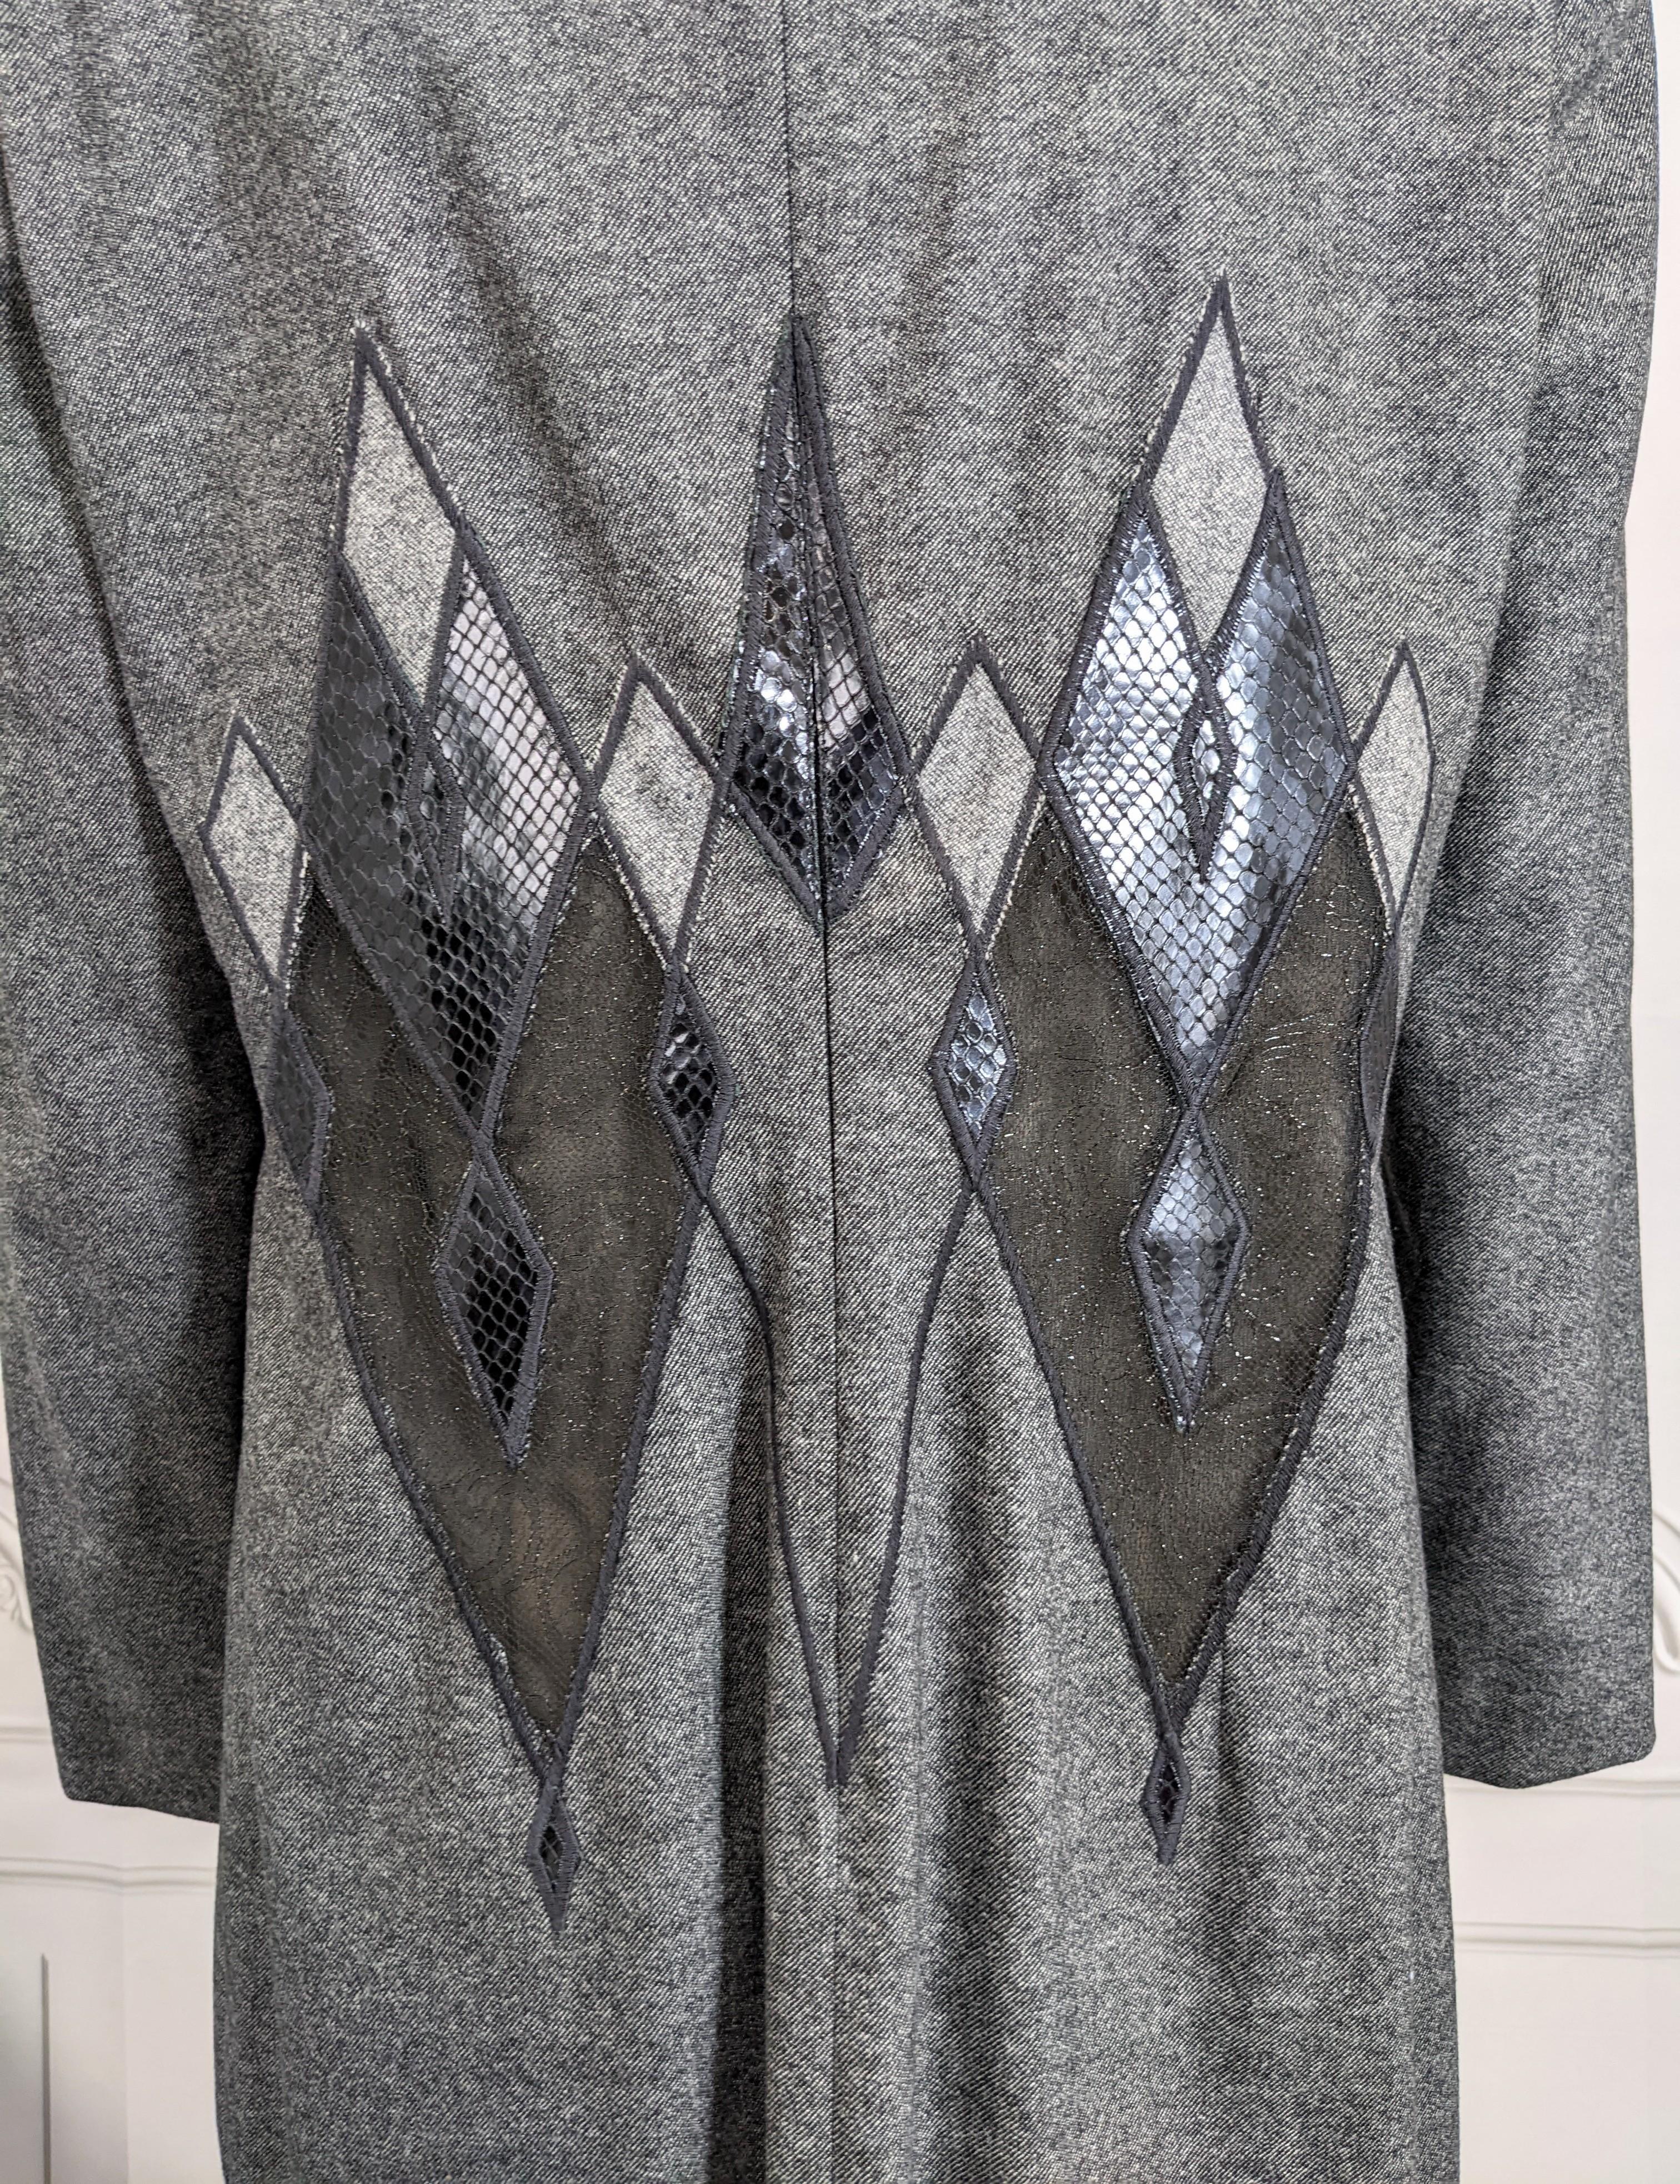 Givenchy By Alexander McQueen Flannel, Metallic Lace and Snakeskin Dress For Sale 2